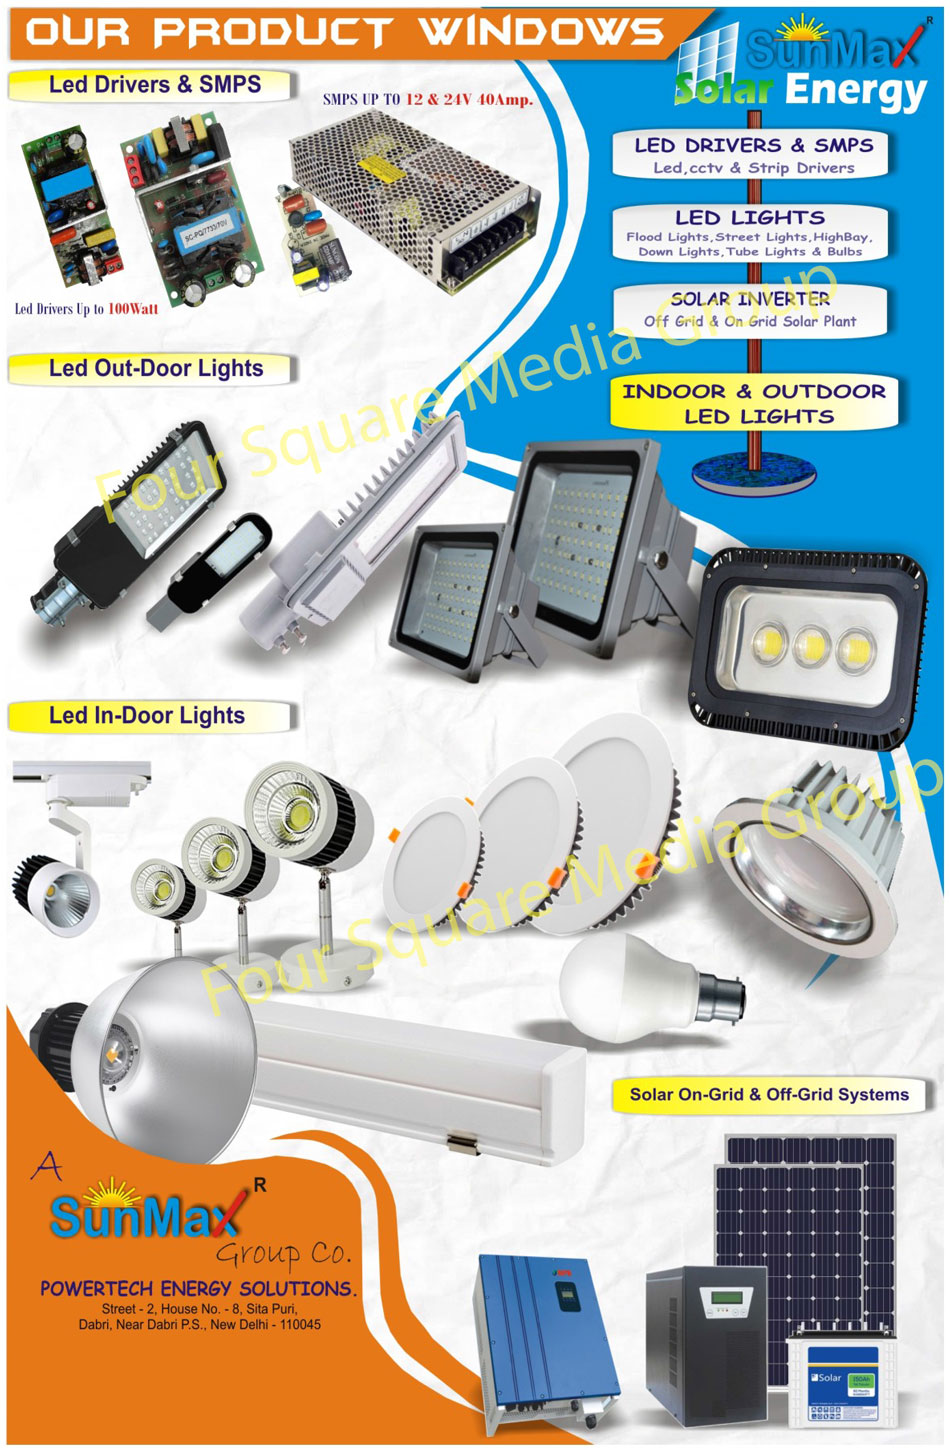 Led Lights, Solar Lights, Solar Inverters, FTL Fittings, Indoor Lights, Outdoor Lights, Electronic Blast, Gear Box, Electronic Control Gear Box, Led Drivers, Led Tubes, Led Bulbs, Electronic Accessories, Electronic Luminaries, Fancy Led Products, Street Lights, Indoor Led Lights, Outdoor Led Lights, Led Drivers, Led Indoor Lights, Led Outdoor Lights, HPF Driver For Led Bulbs